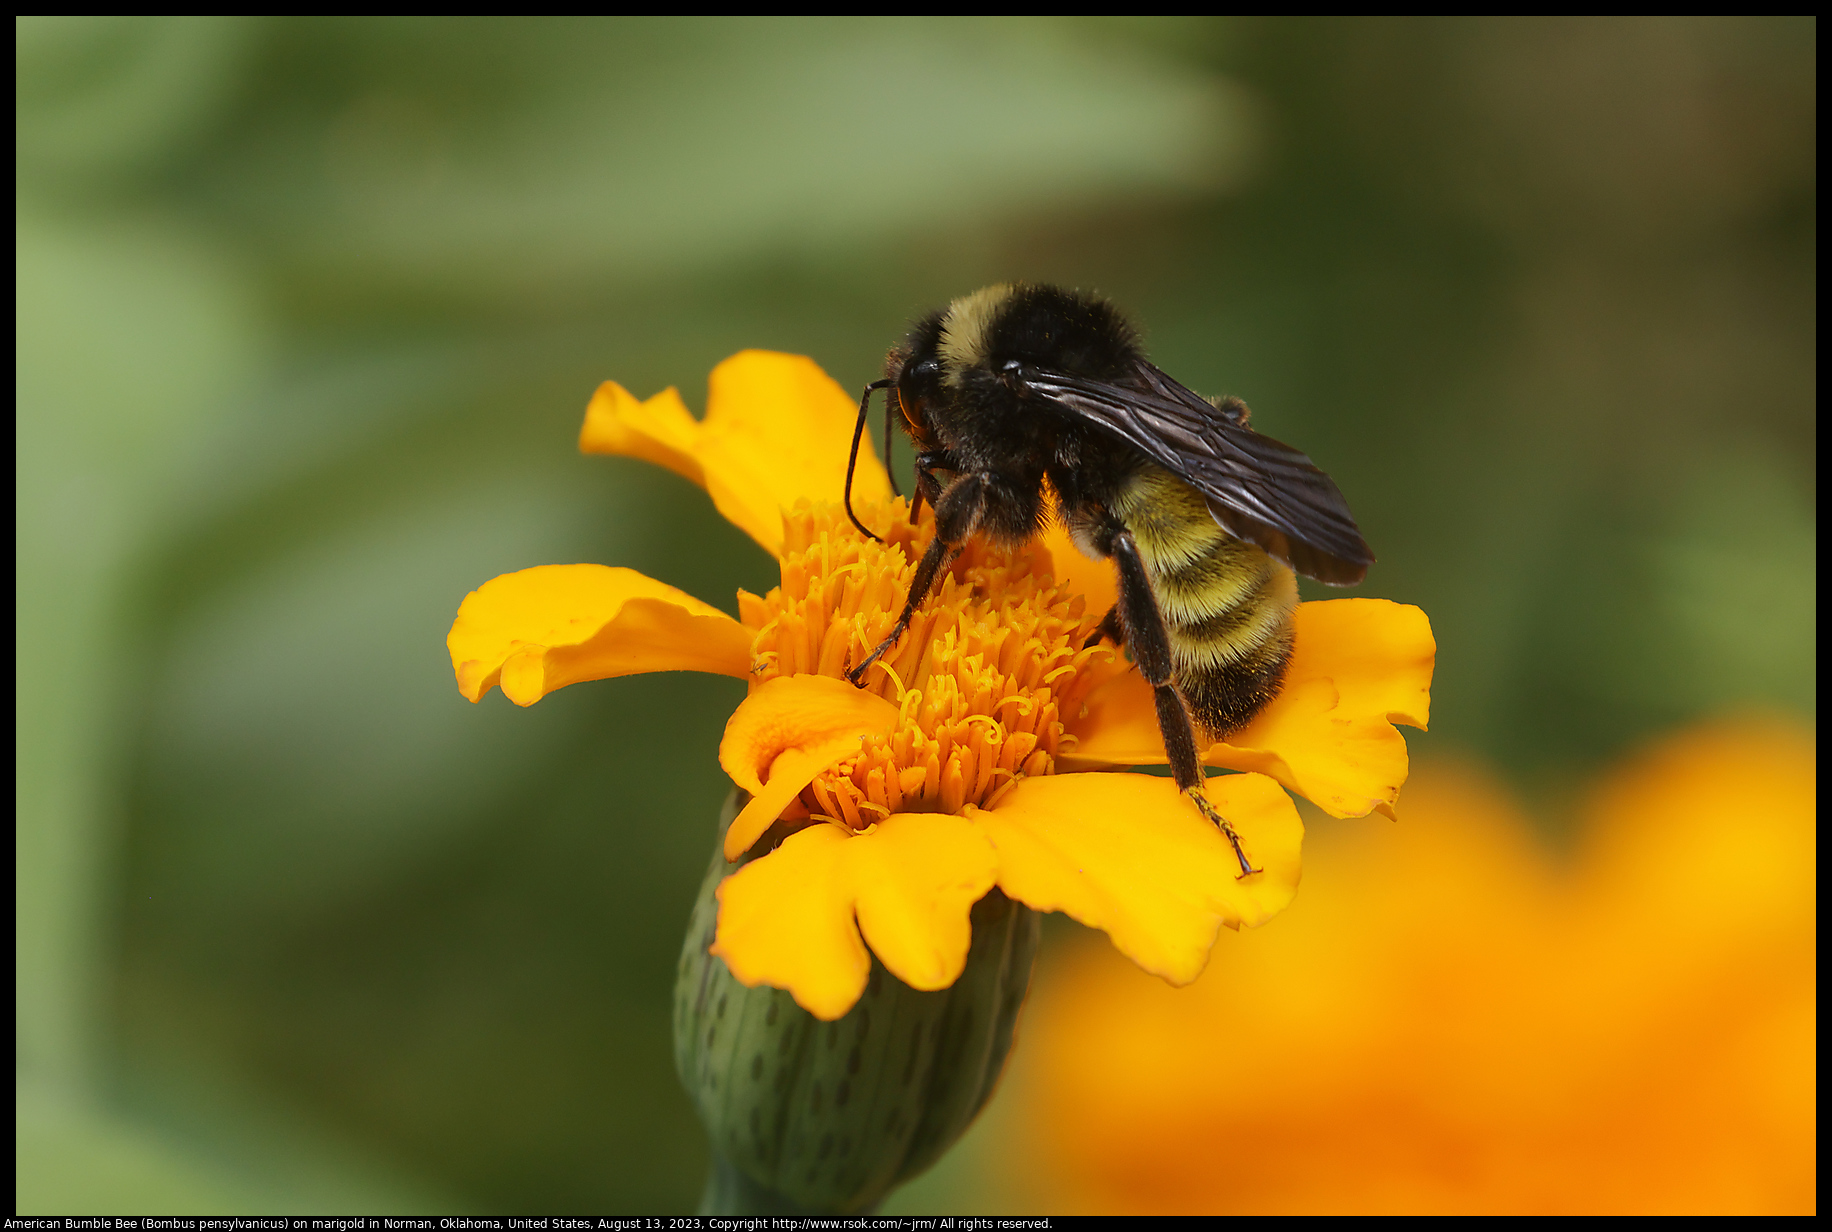 American Bumble Bee (Bombus pensylvanicus) on marigold in Norman, Oklahoma, United States on August 13, 2023